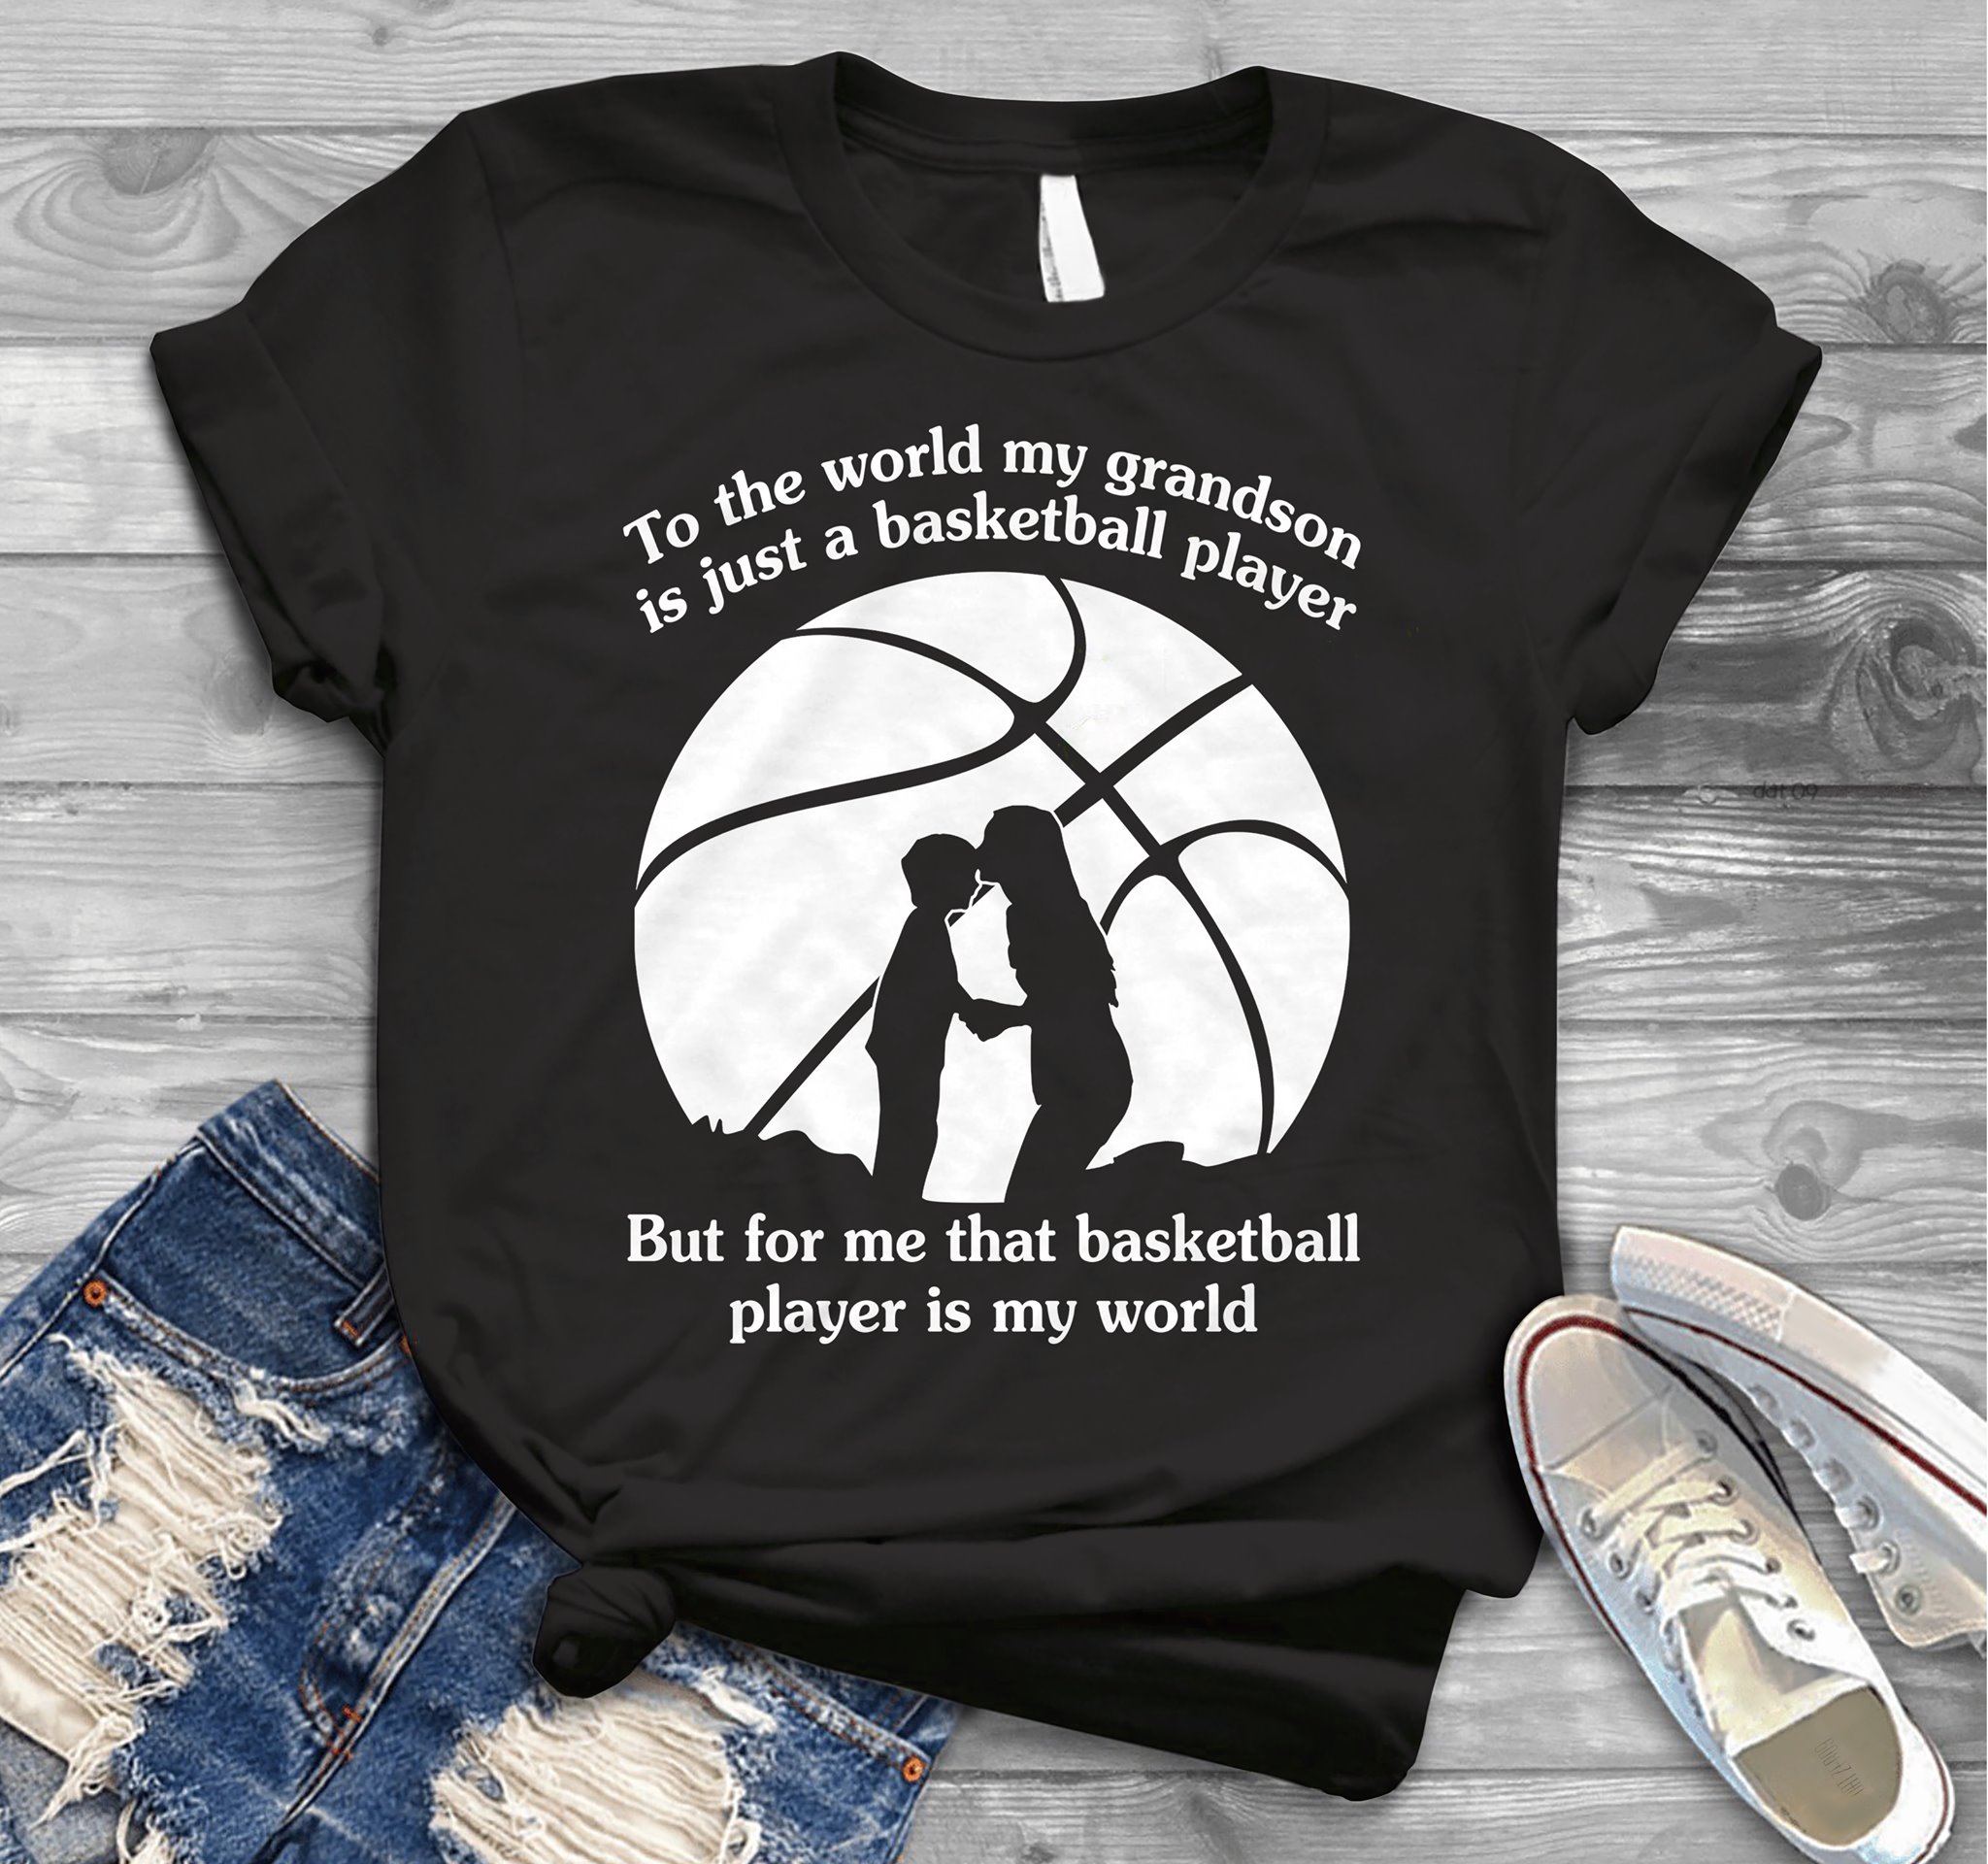 To the world my grandson is just a basketball player but for me that basketball player is my world